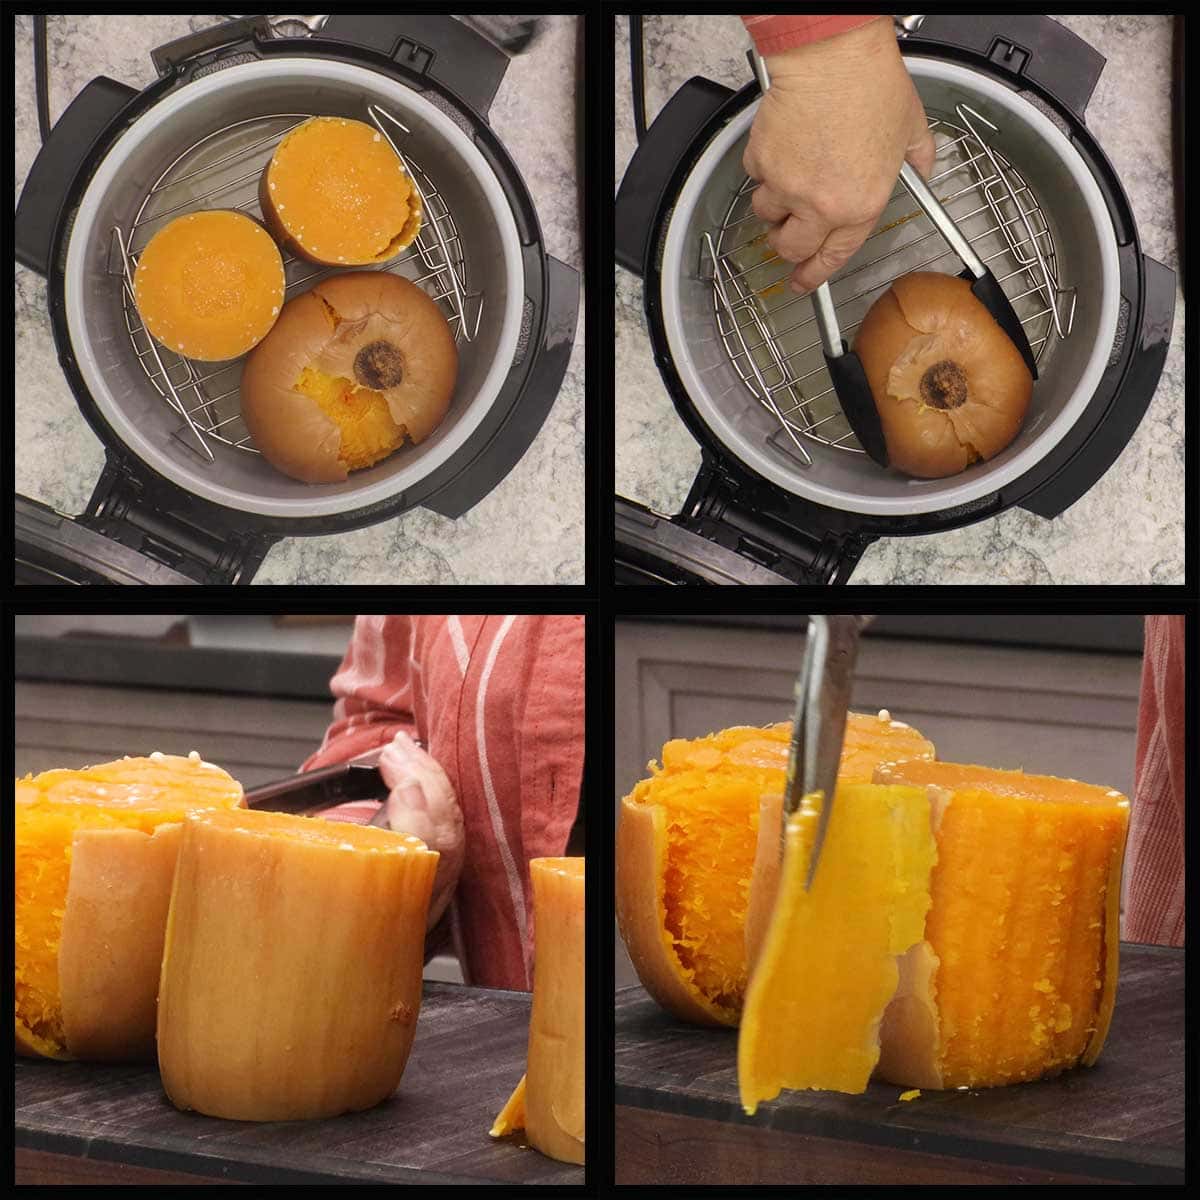 removing the skin from the cooked butternut squash.